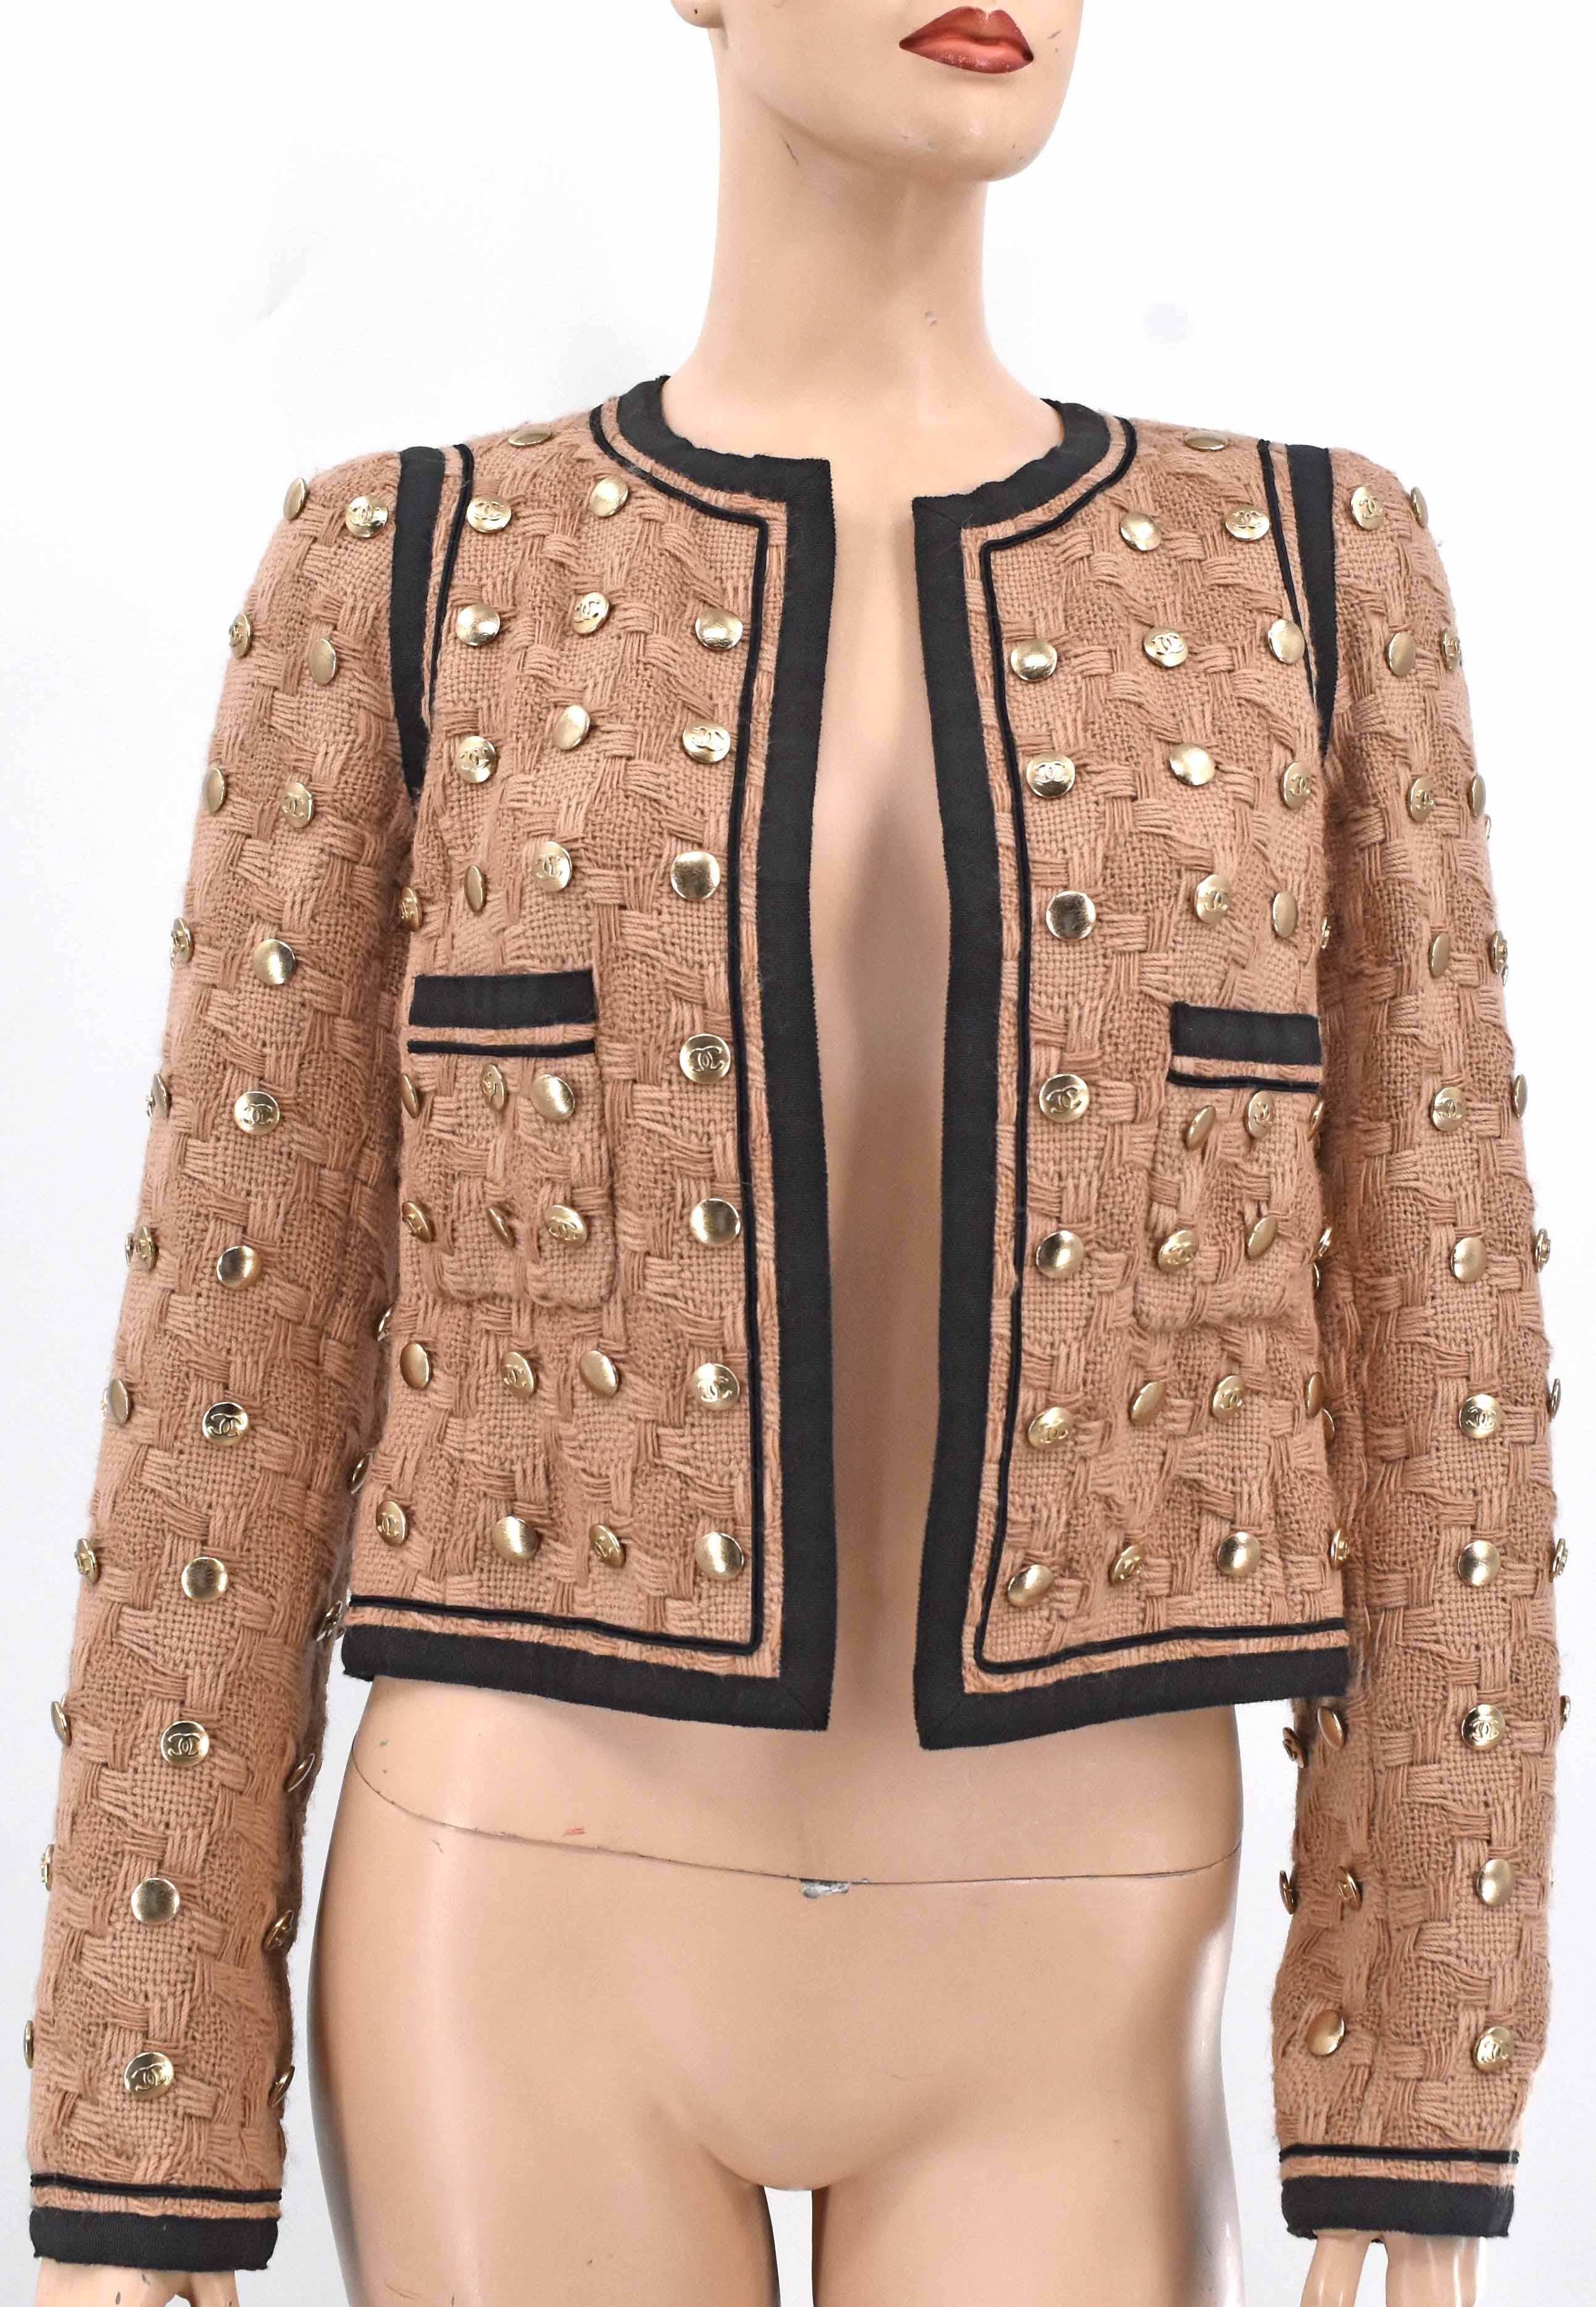 Chanel CC Logo Studded Tweed Wool Jacket 08A 2008 New Fr 36 In New Condition For Sale In Merced, CA